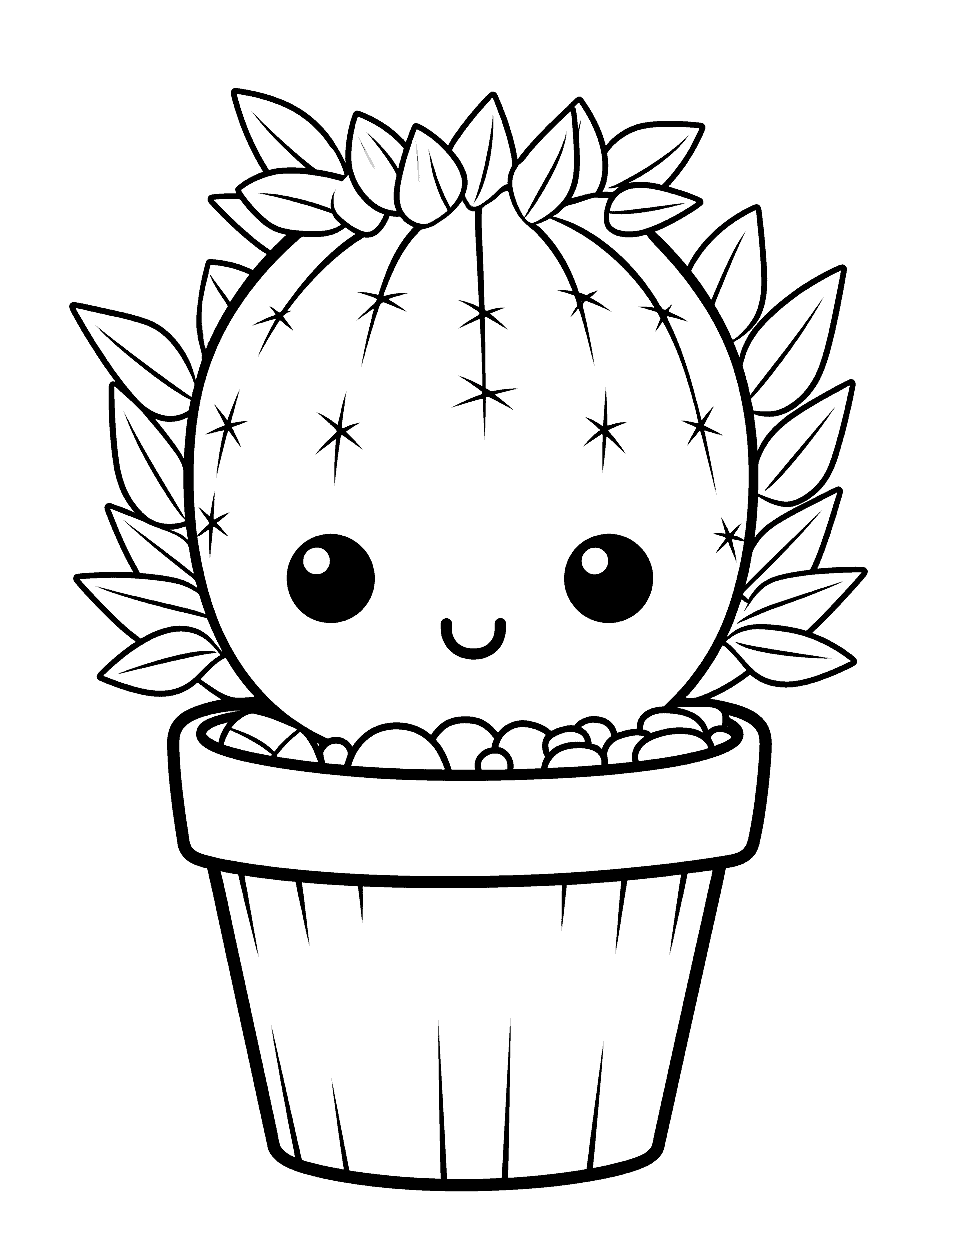 Kawaii Cactus Adult Coloring Page - A cute little cactus with big, sparkling eyes.